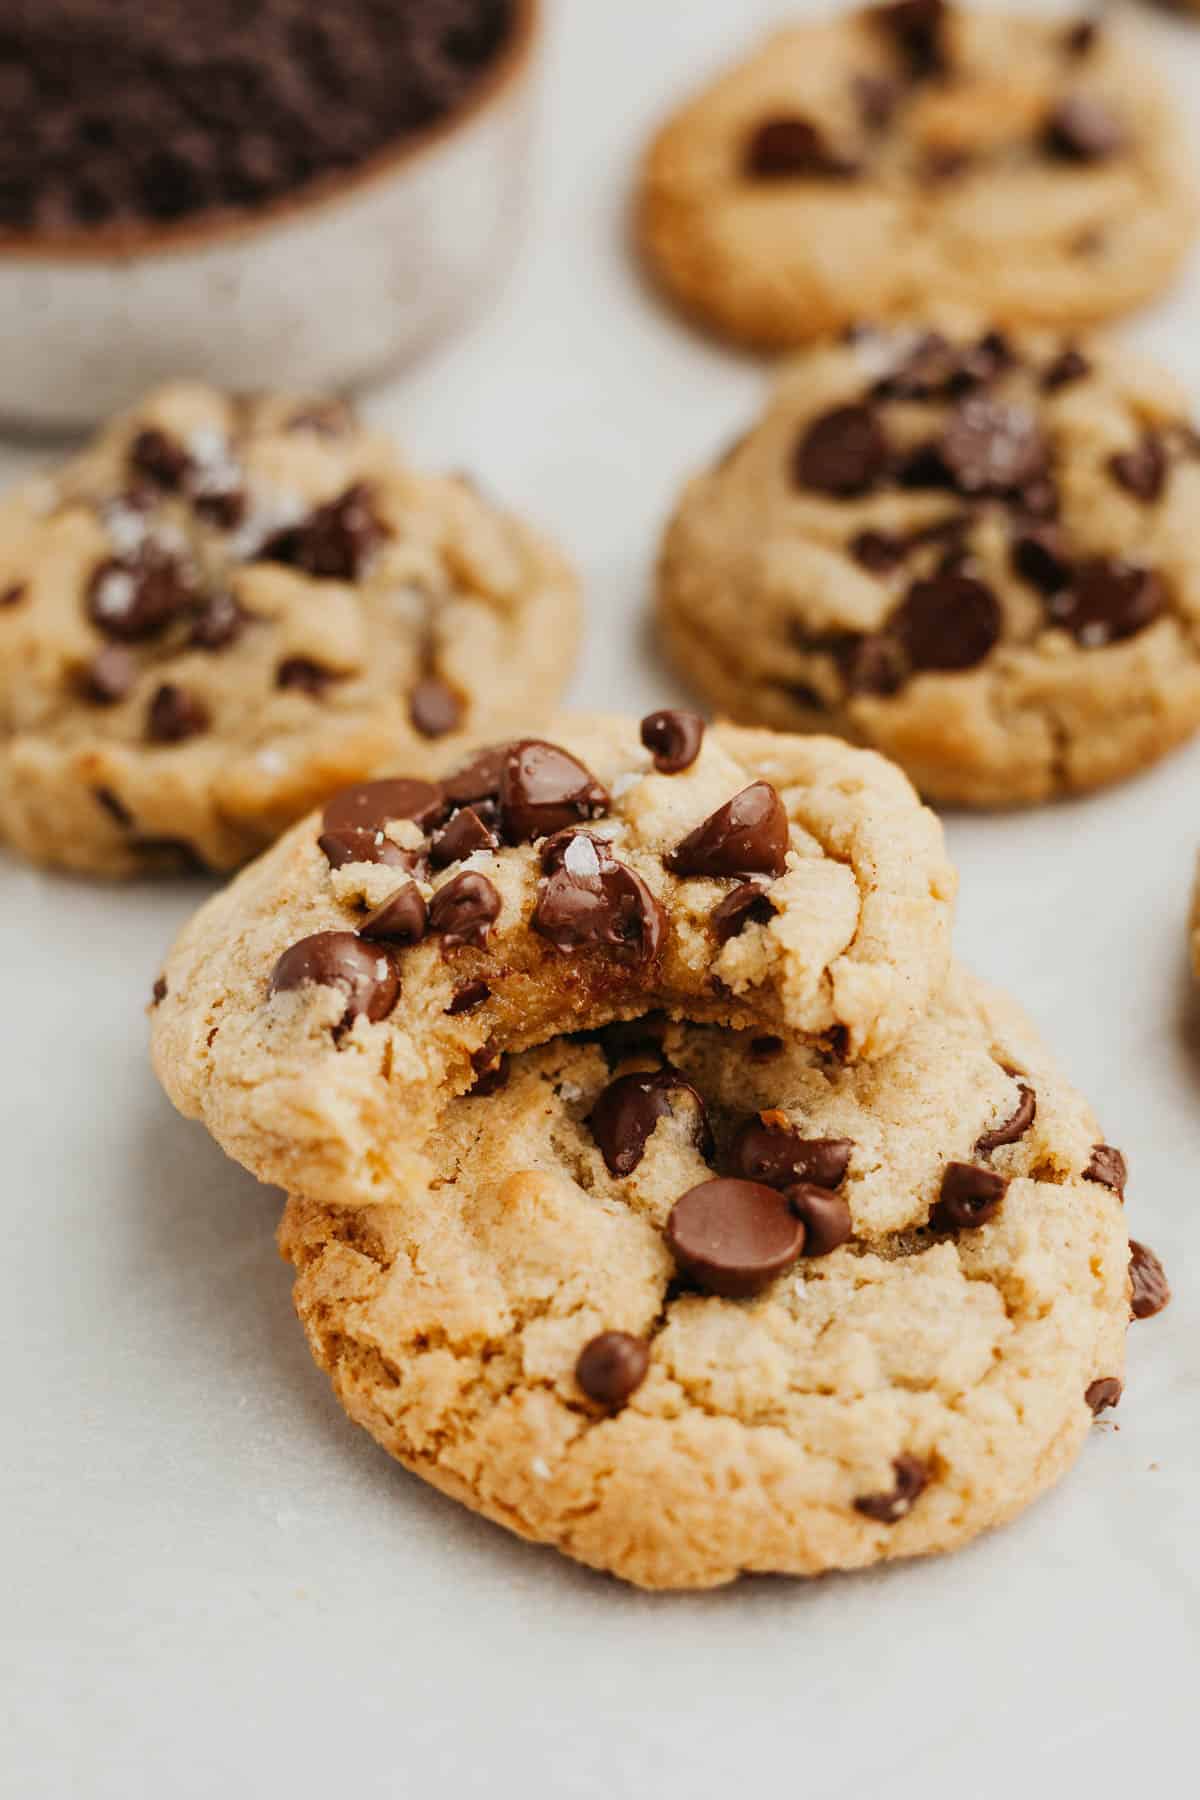 Chocolate chip cookies on parchment paper, one has a bite taken out of it.